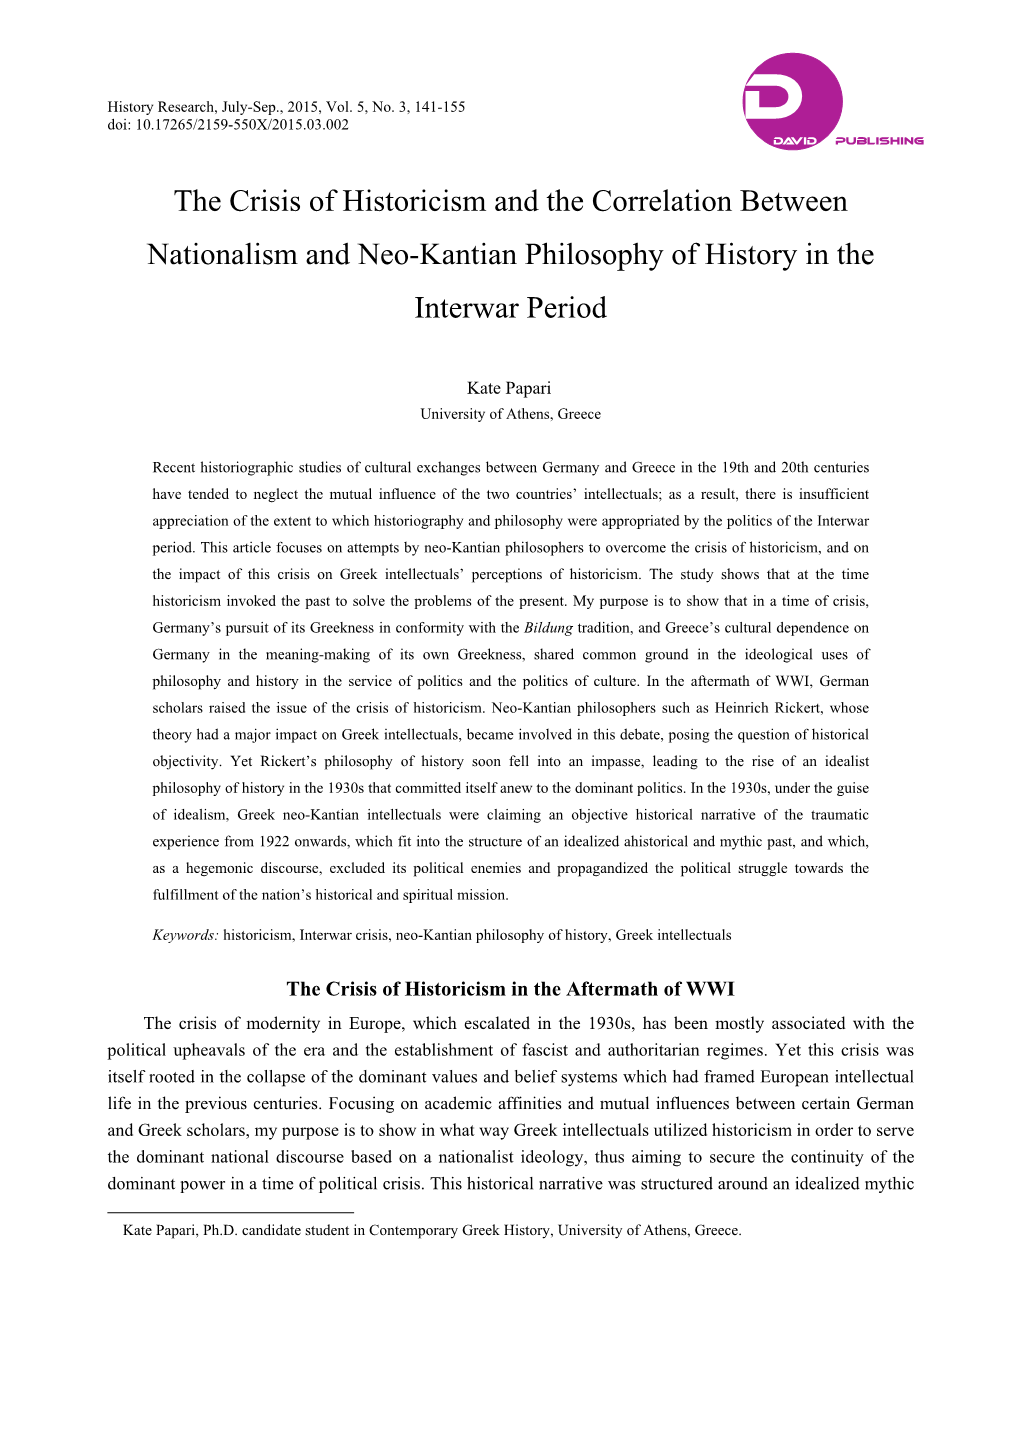 The Crisis of Historicism and the Correlation Between Nationalism and Neo-Kantian Philosophy of History in the Interwar Period